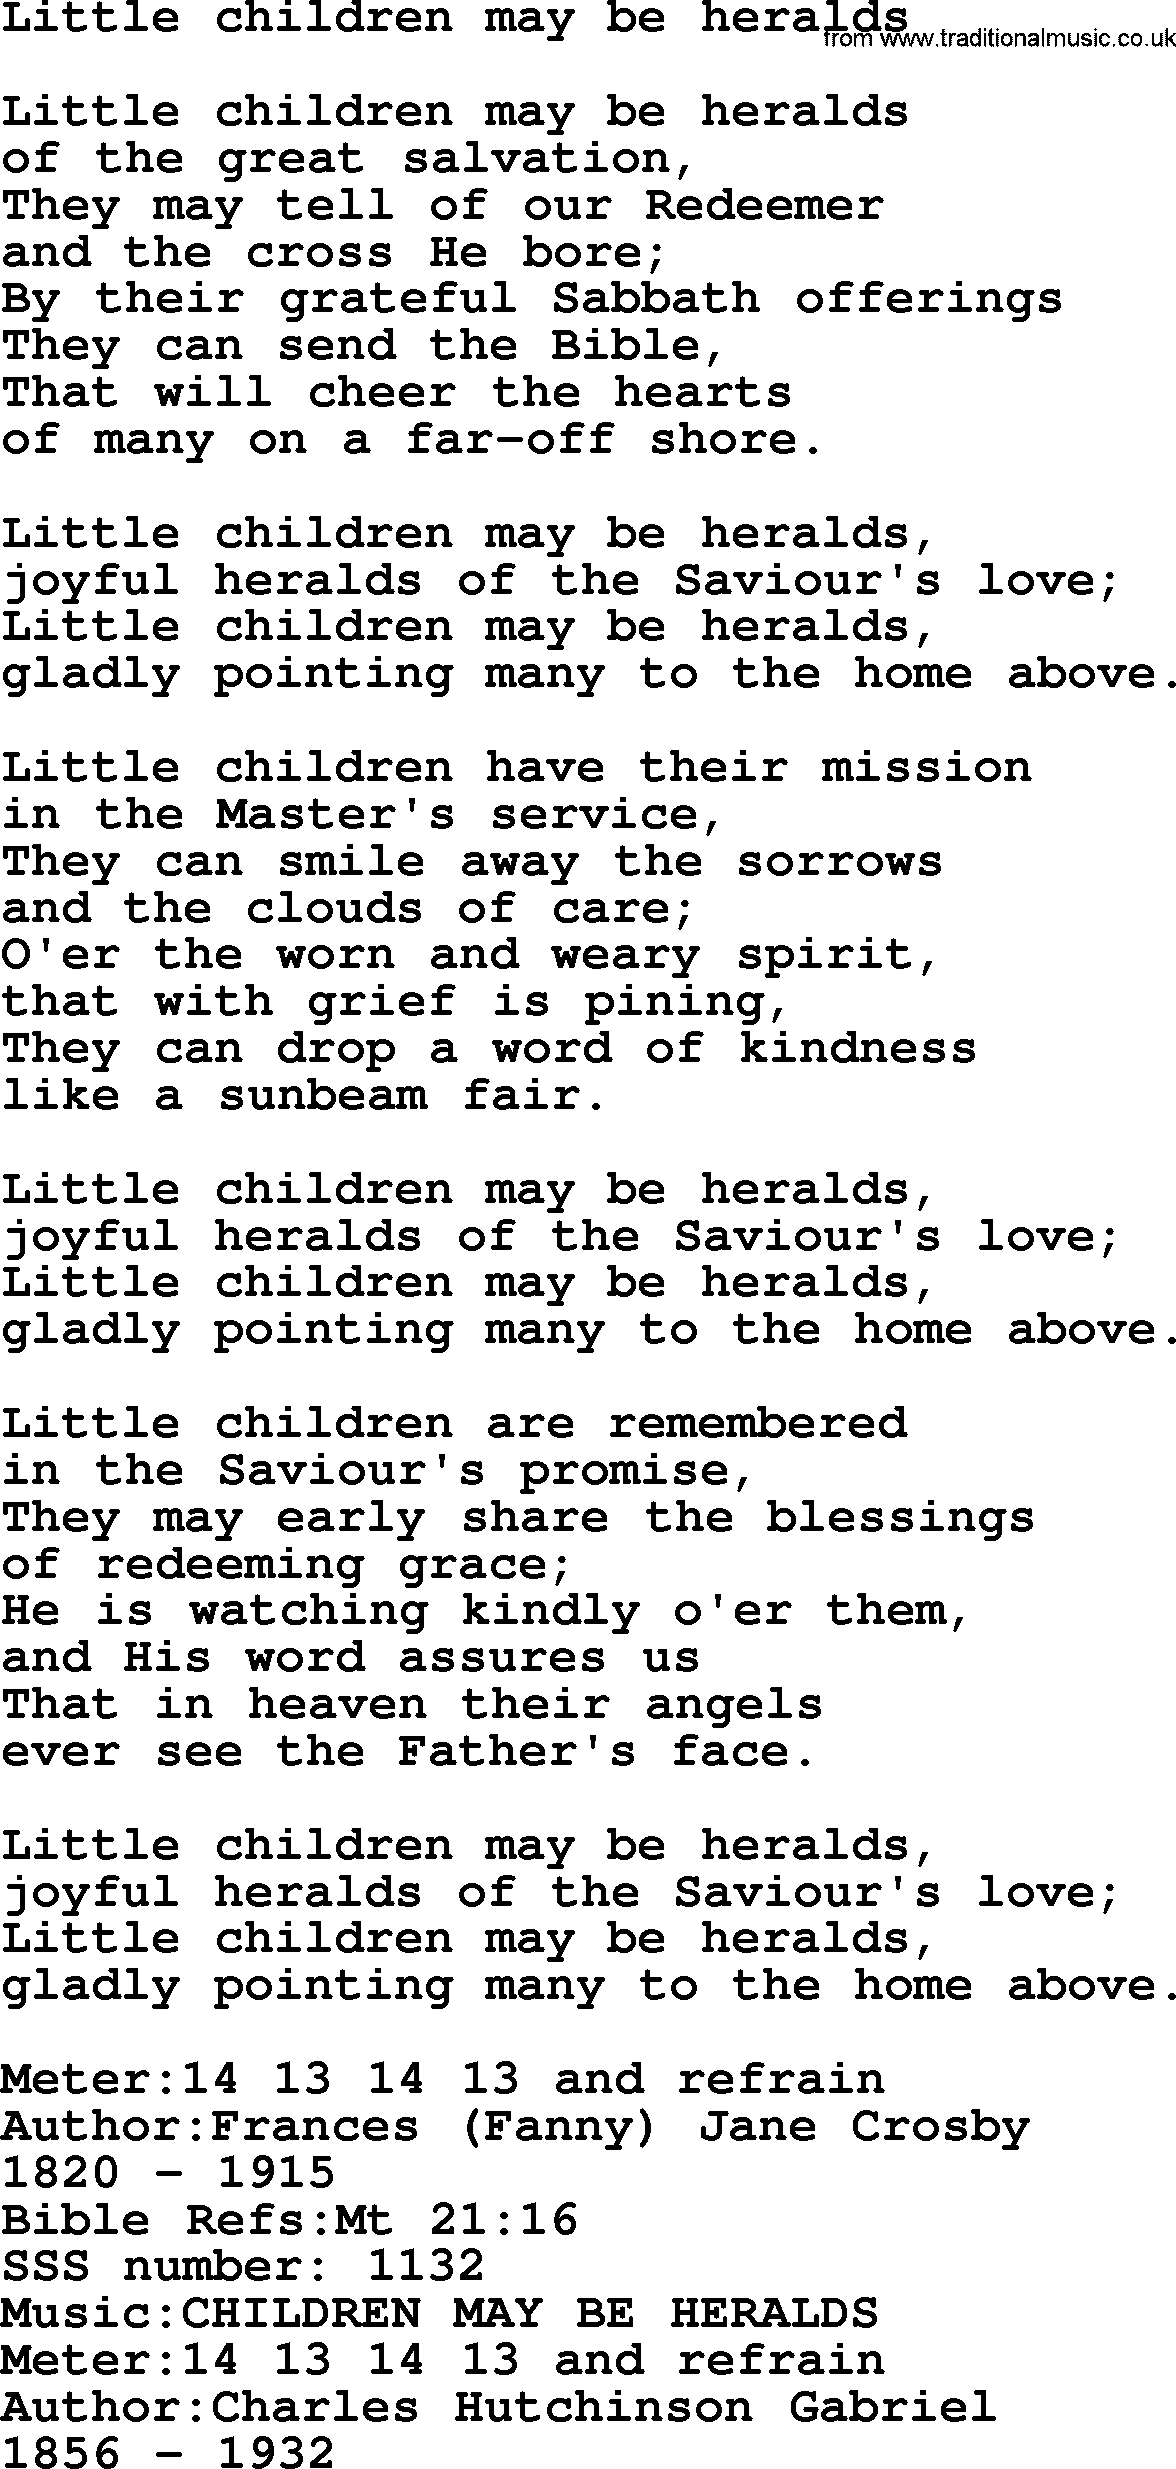 Sacred Songs and Solos complete, 1200 Hymns, title: Little Children May Be Heralds, lyrics and PDF